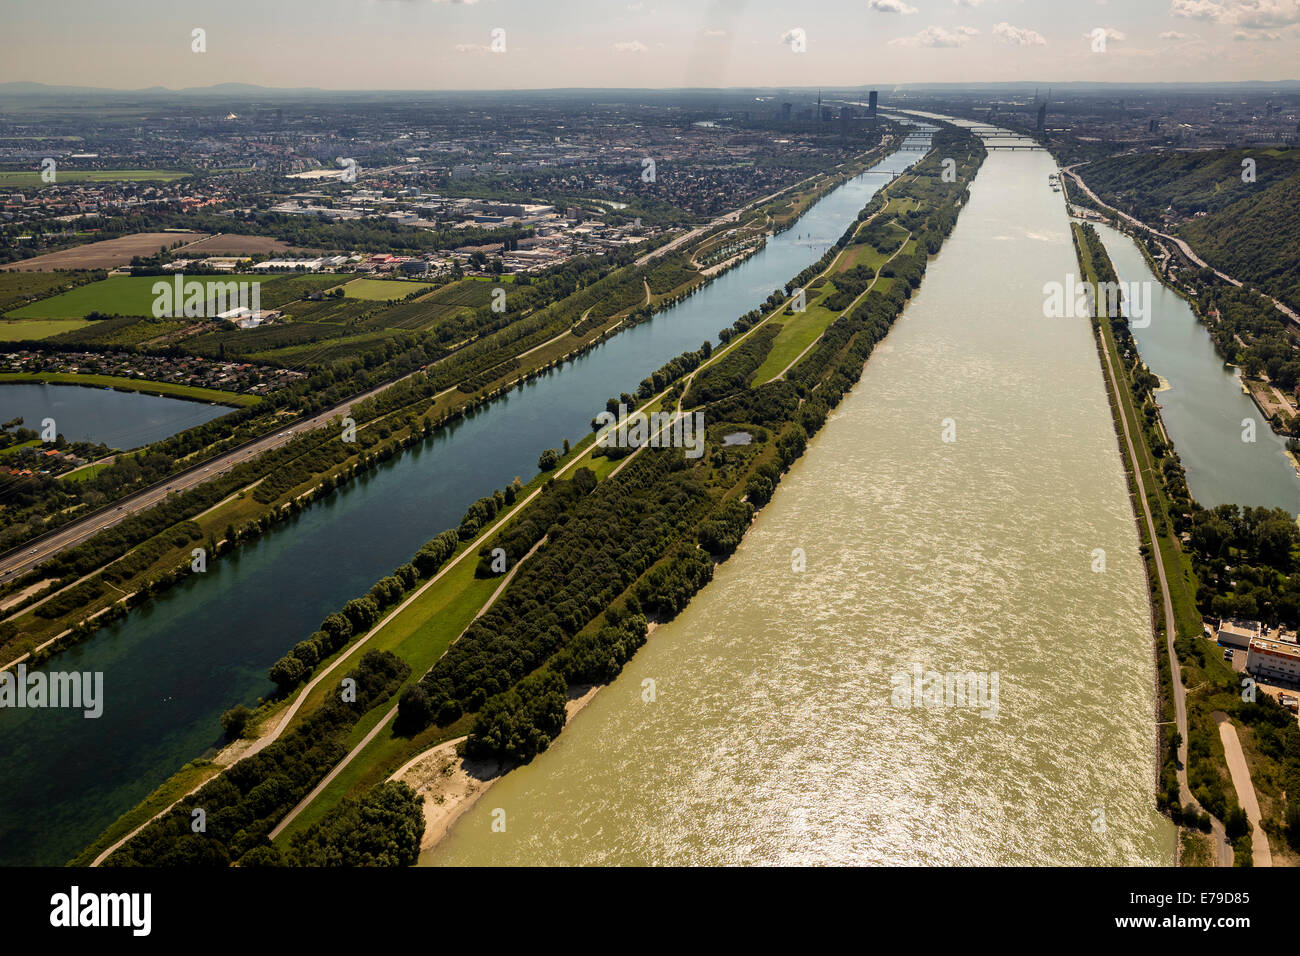 Aerial view, Danube island, Danube and relief canal, intake structure, Langenzersdorf, Lower Austria, Austria Stock Photo